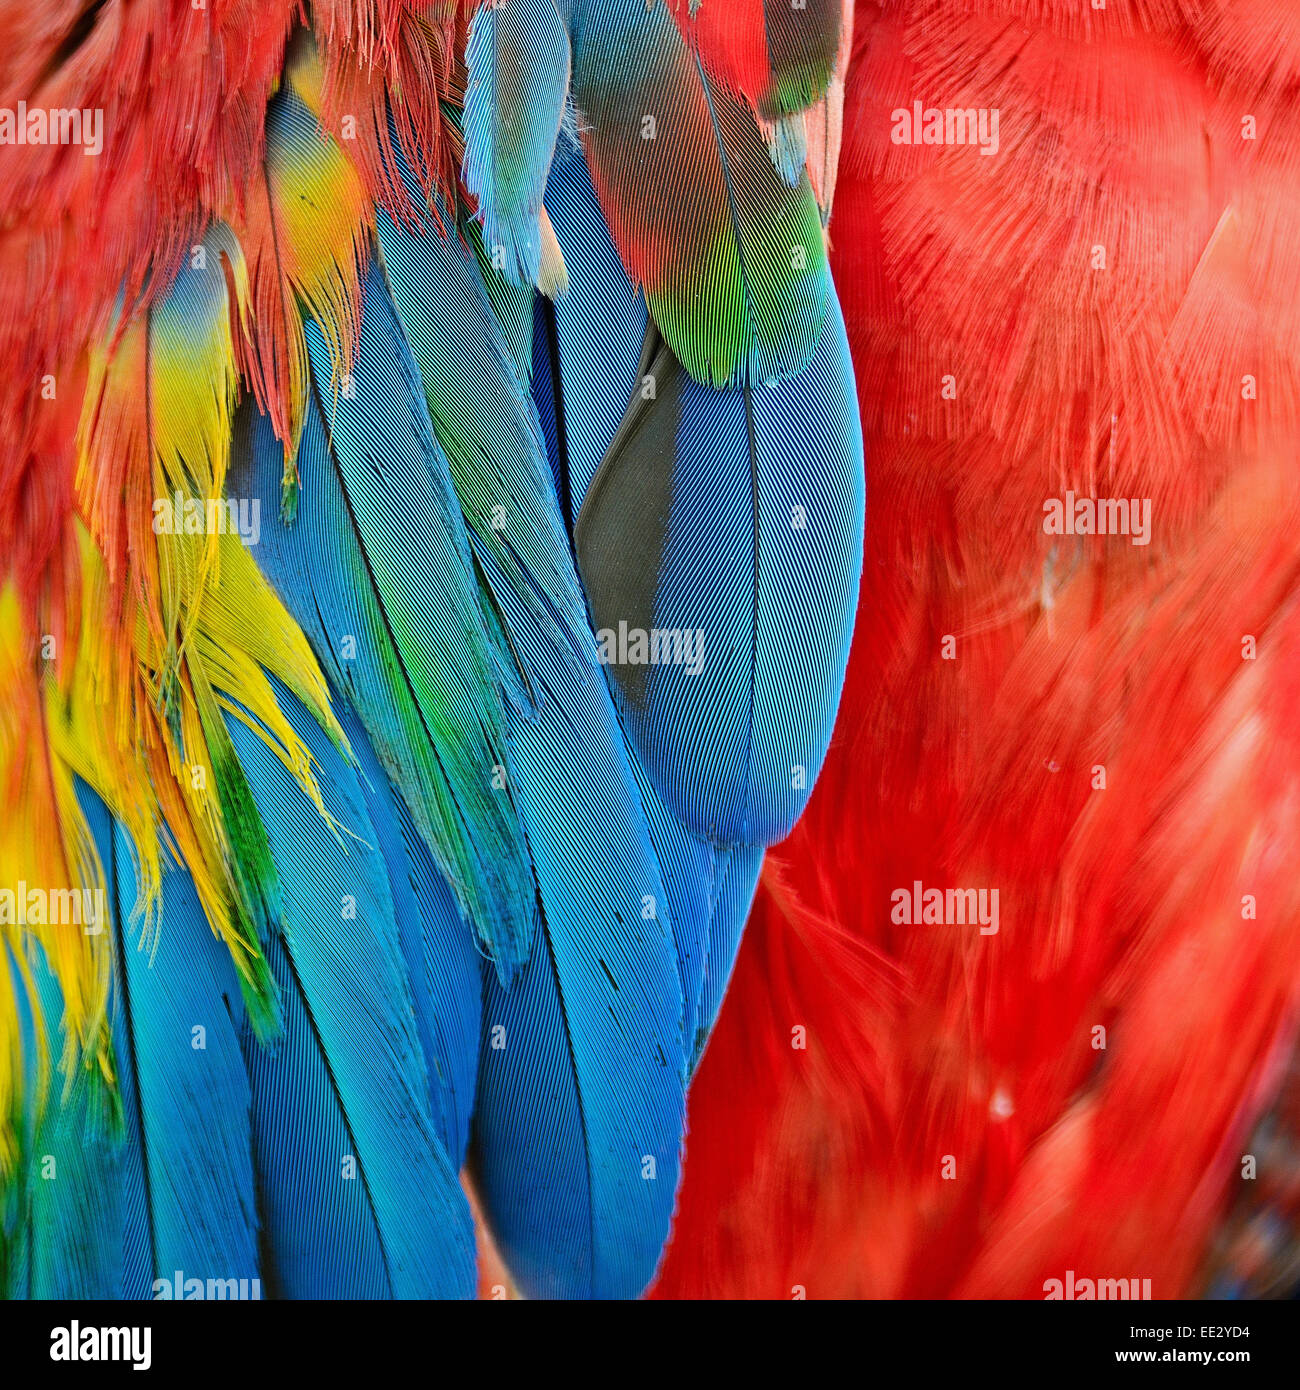 Scarlet Macaw feathers, colorful background texture Stock Photo